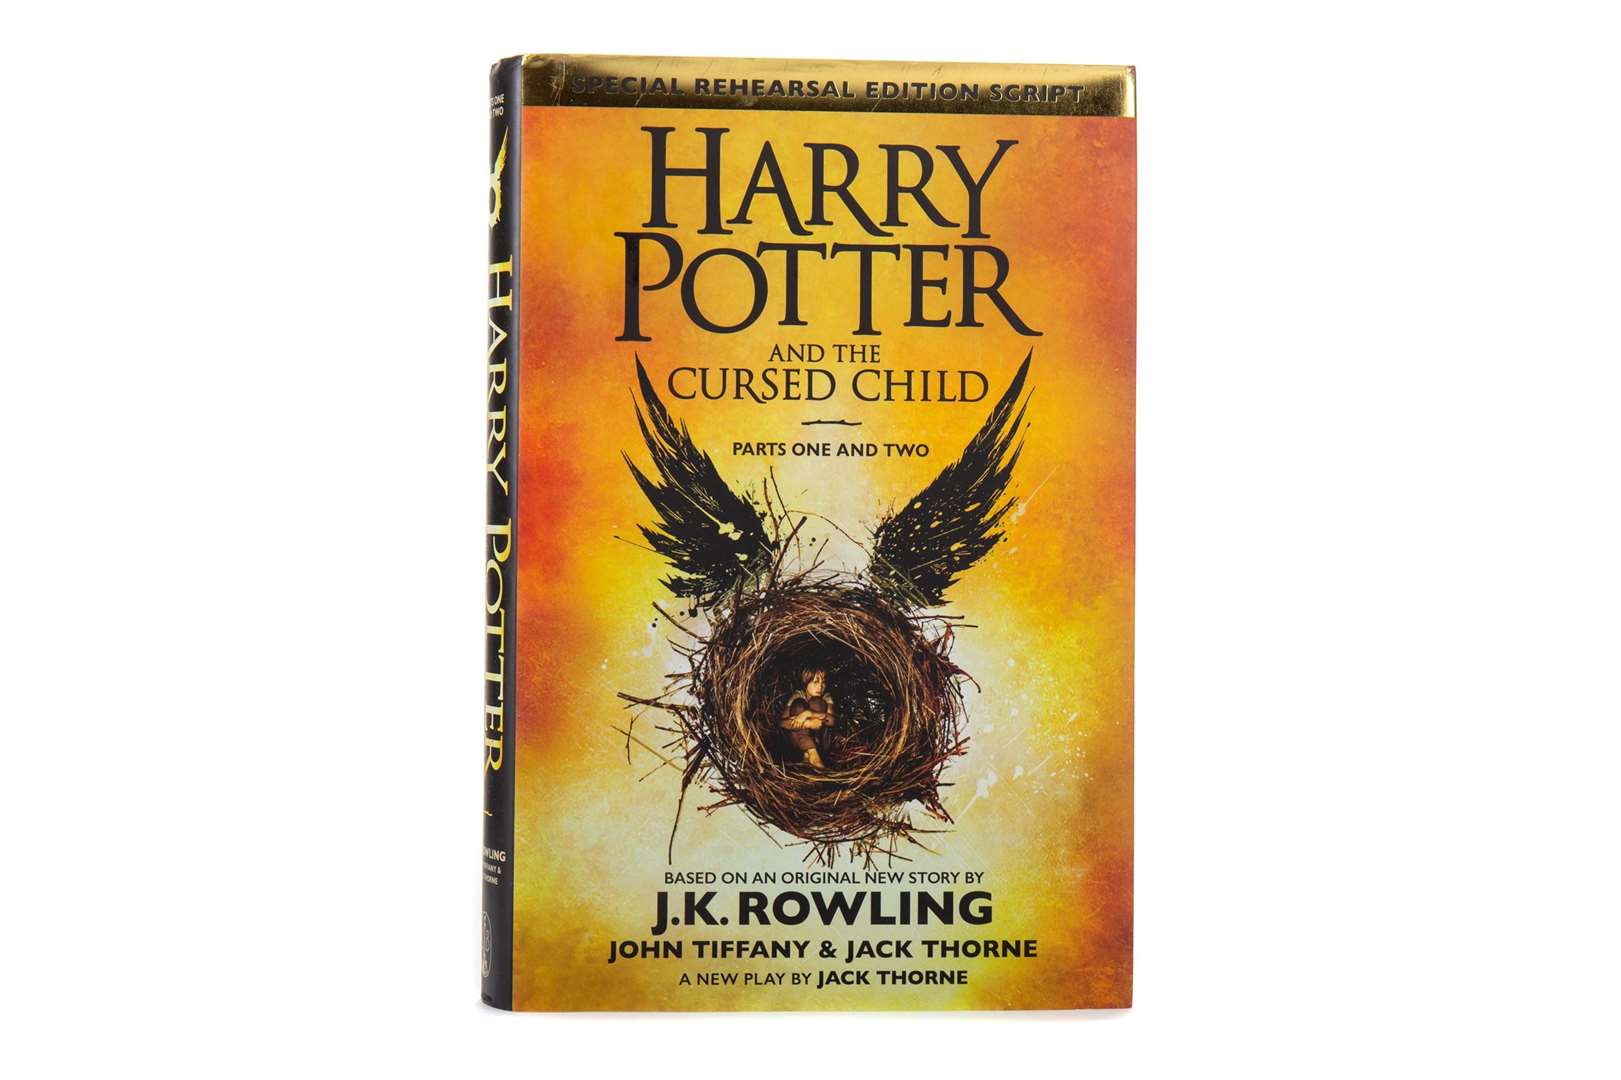 The signed book of the play Harry Potter And The Cursed Child (McTear’s/PA)